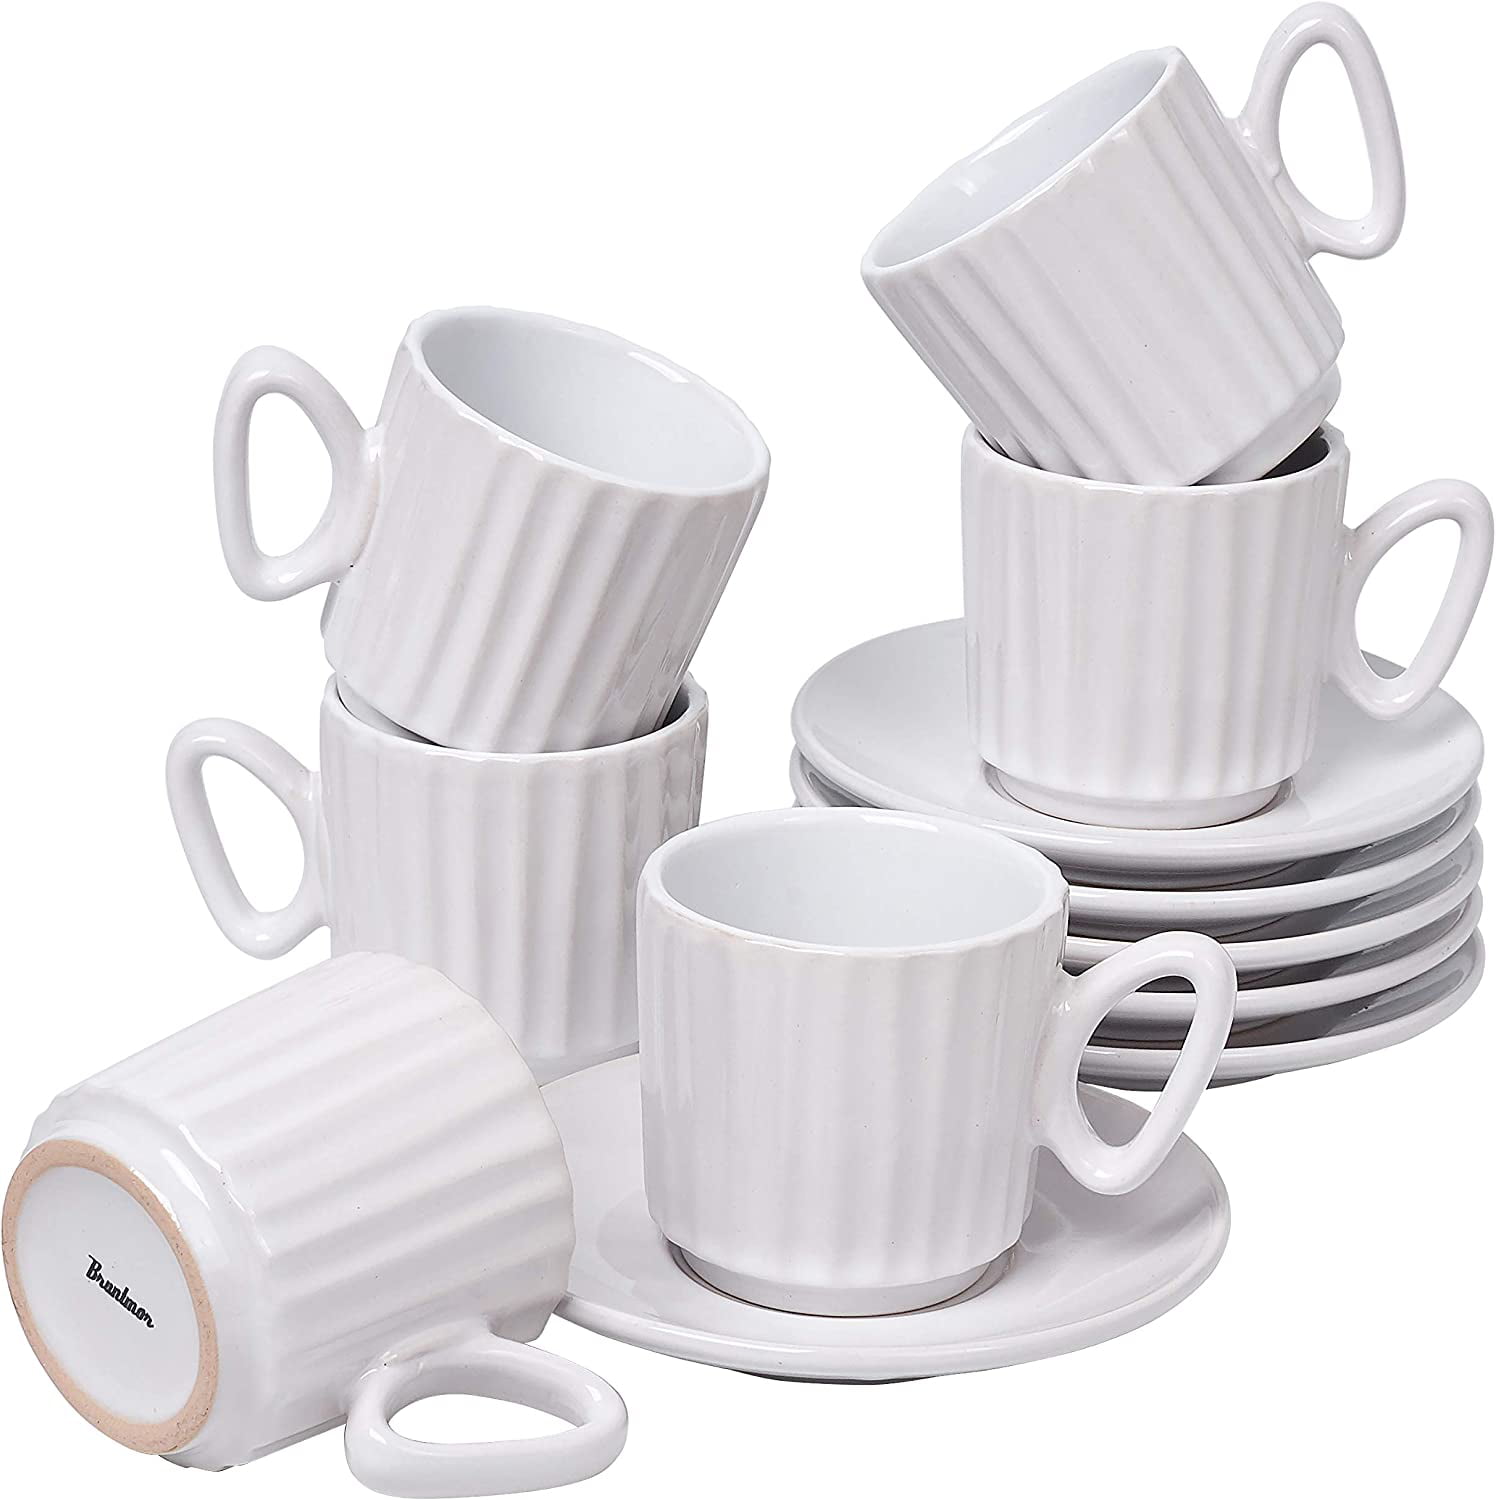 Super Stackable Dowan Espresso Cups with Saucers Perfect for Double Espresso or Cappuccinos Set of 6 4 Ounce Large Demitasse Cups Ideal Gift Dishwasher Safe Cute Golden Clock Design 